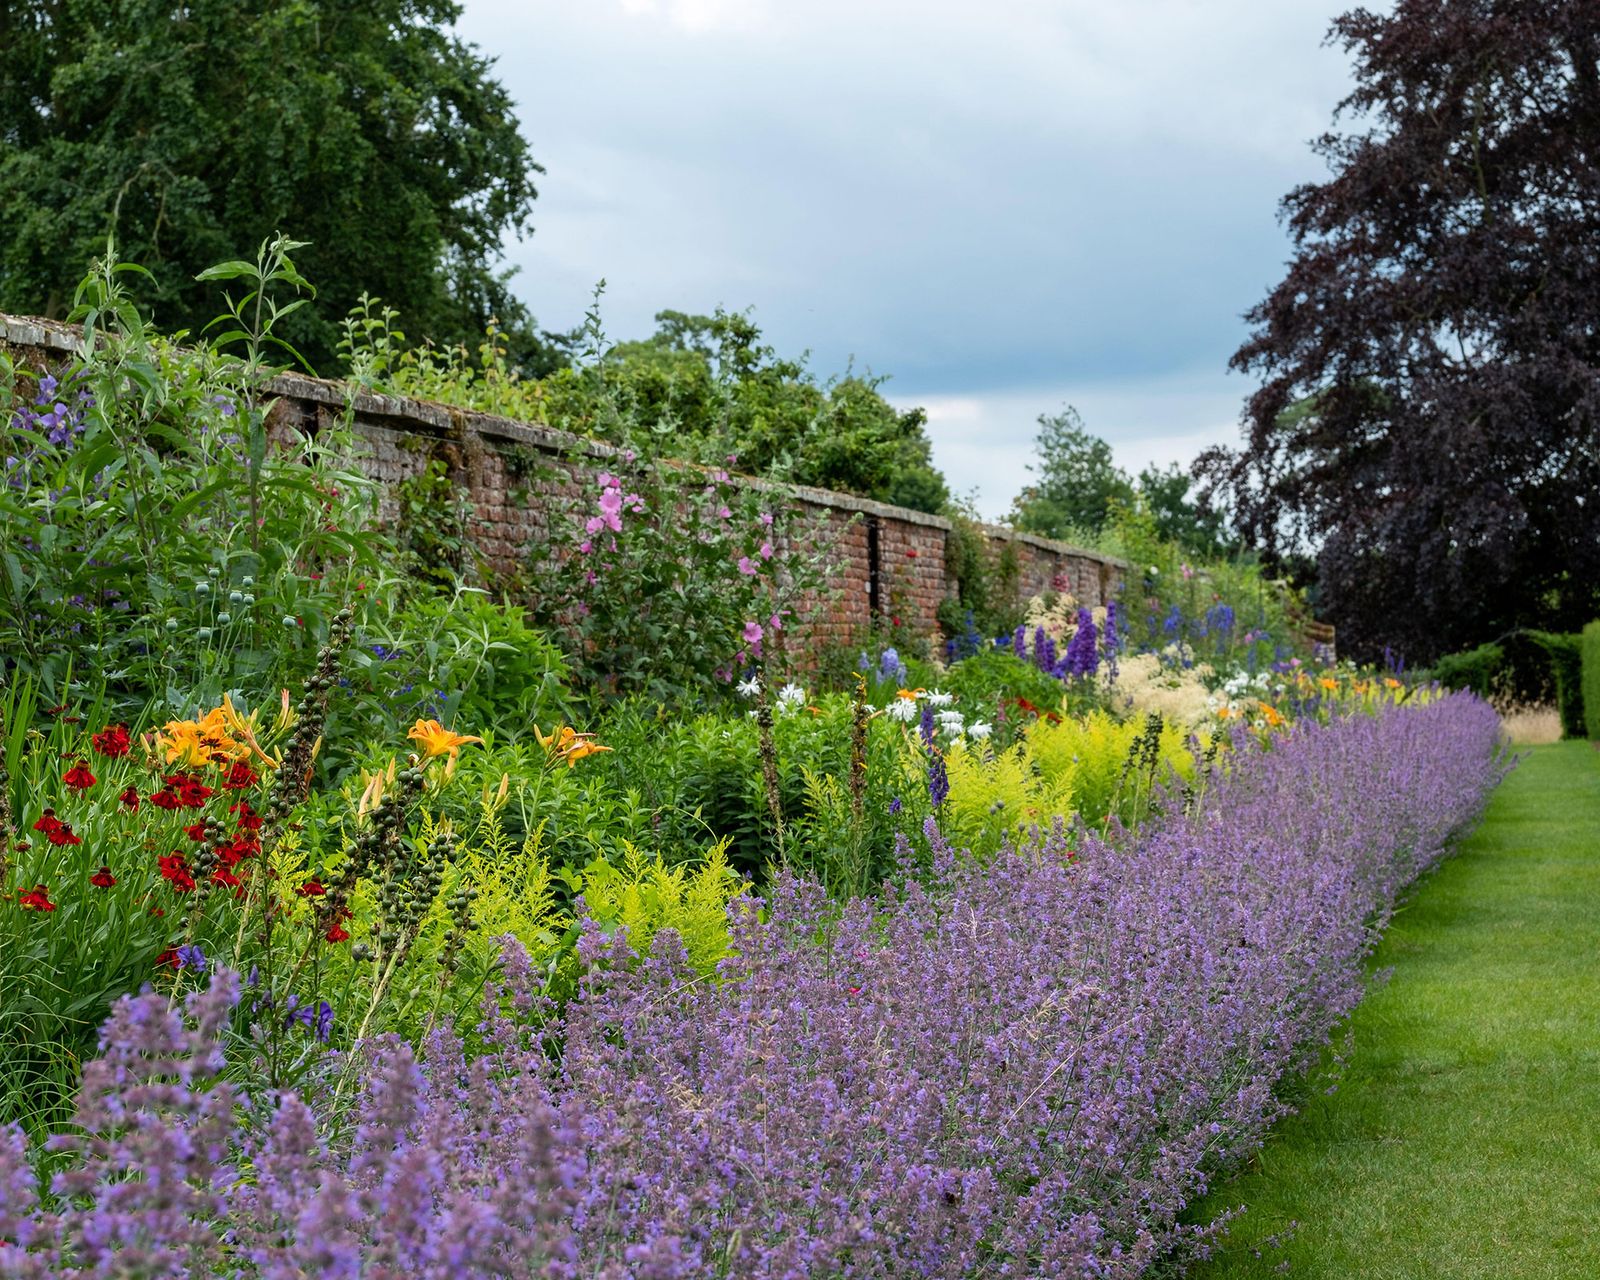 Landscaping with flowers: 11 ways to create a floral feast | Gardeningetc